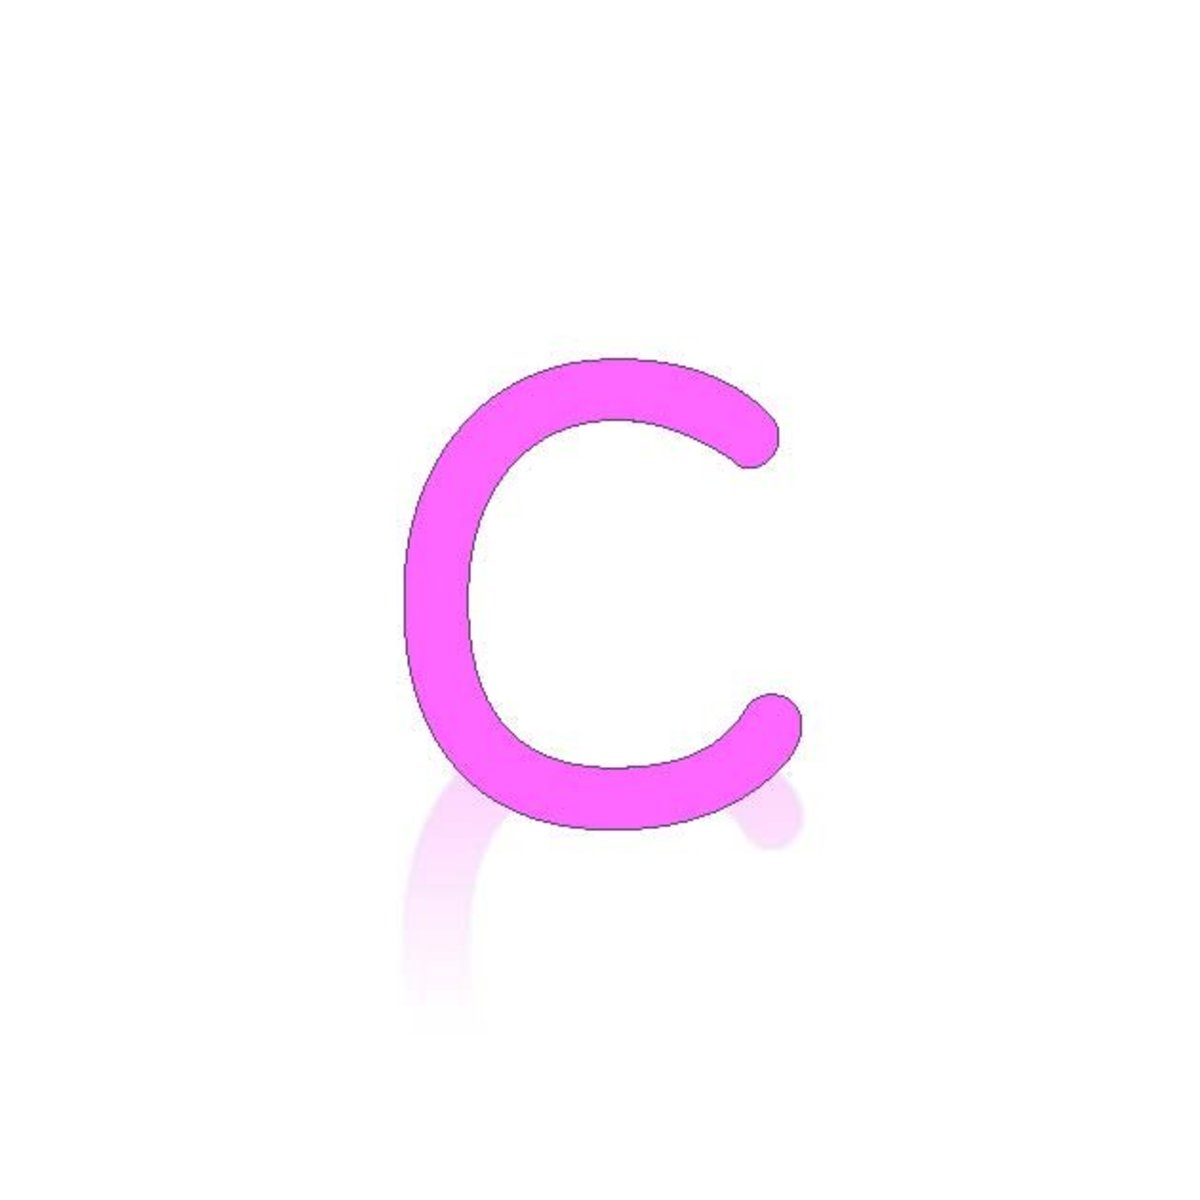 Acrostic Name Poems For Girls Names Starting With C Hubpages